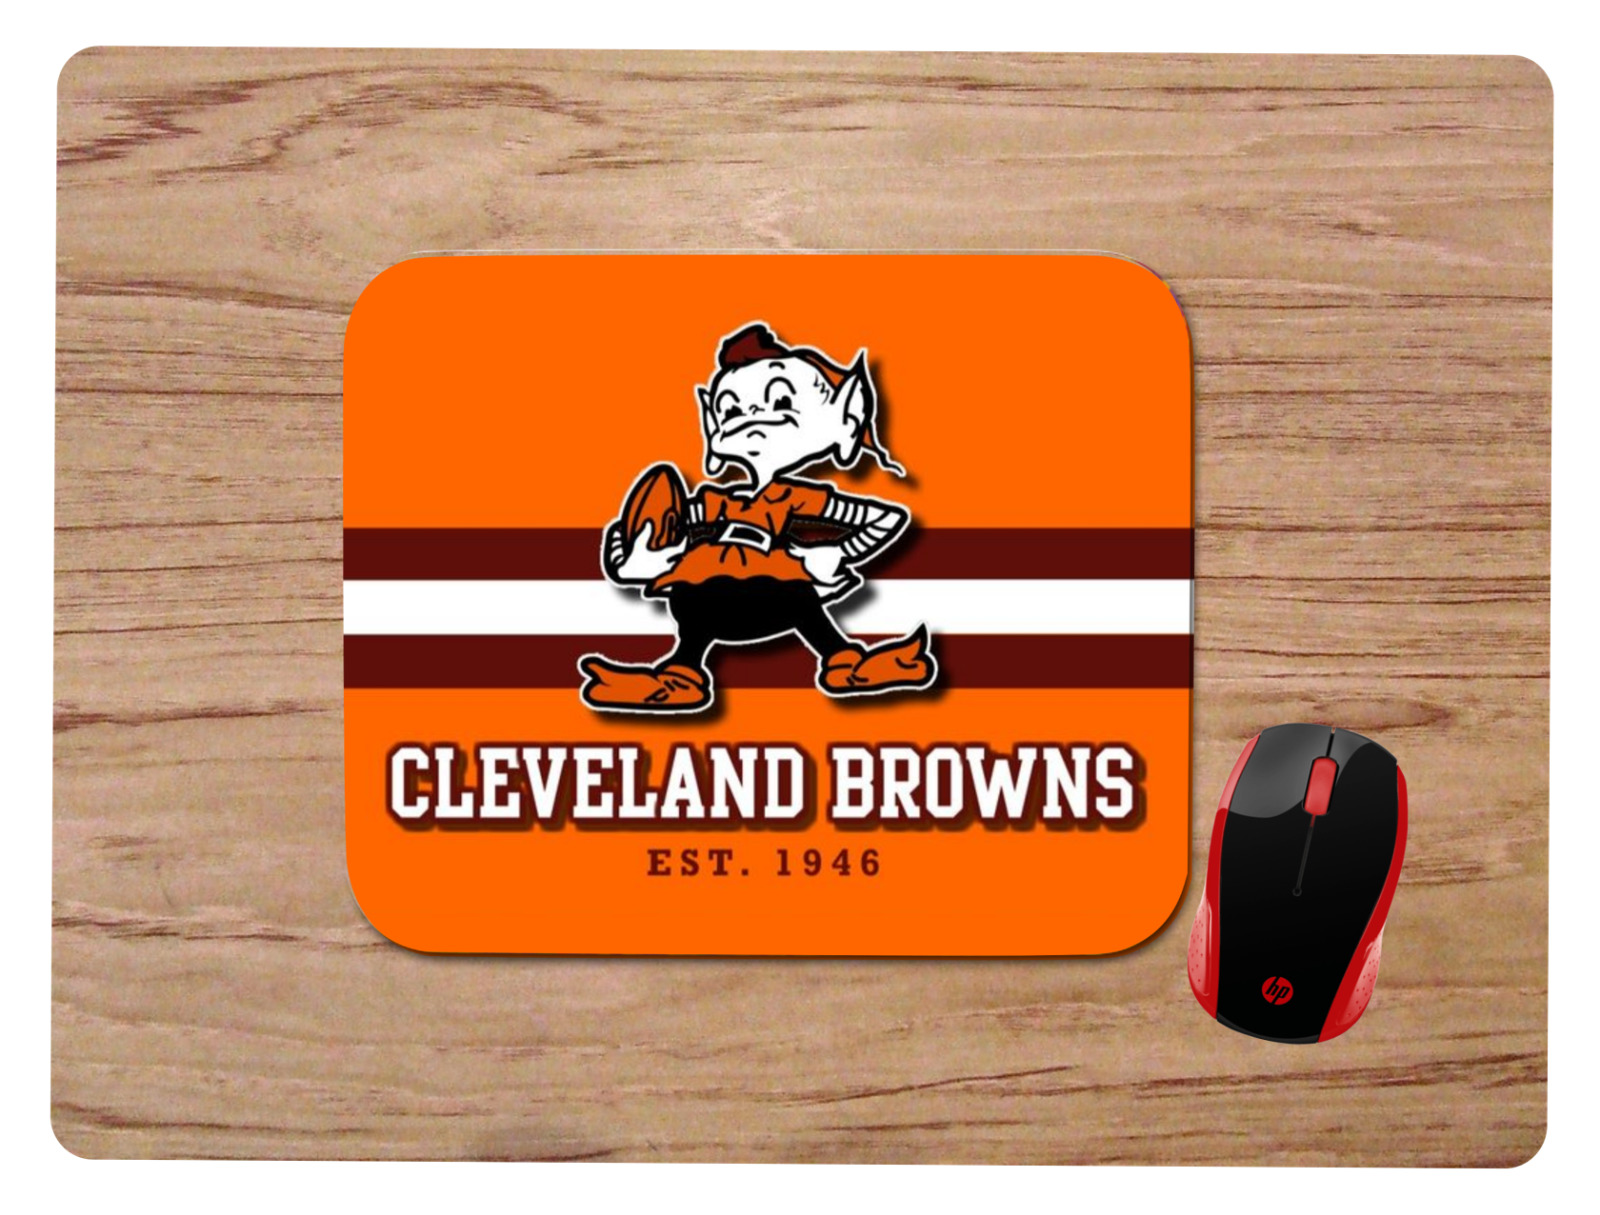 CLEVELAND BROWNS ELF OLD SCHOOL DESIGN MOUSEPAD MOUSE PAD HOME OFFICE GIFT NFL